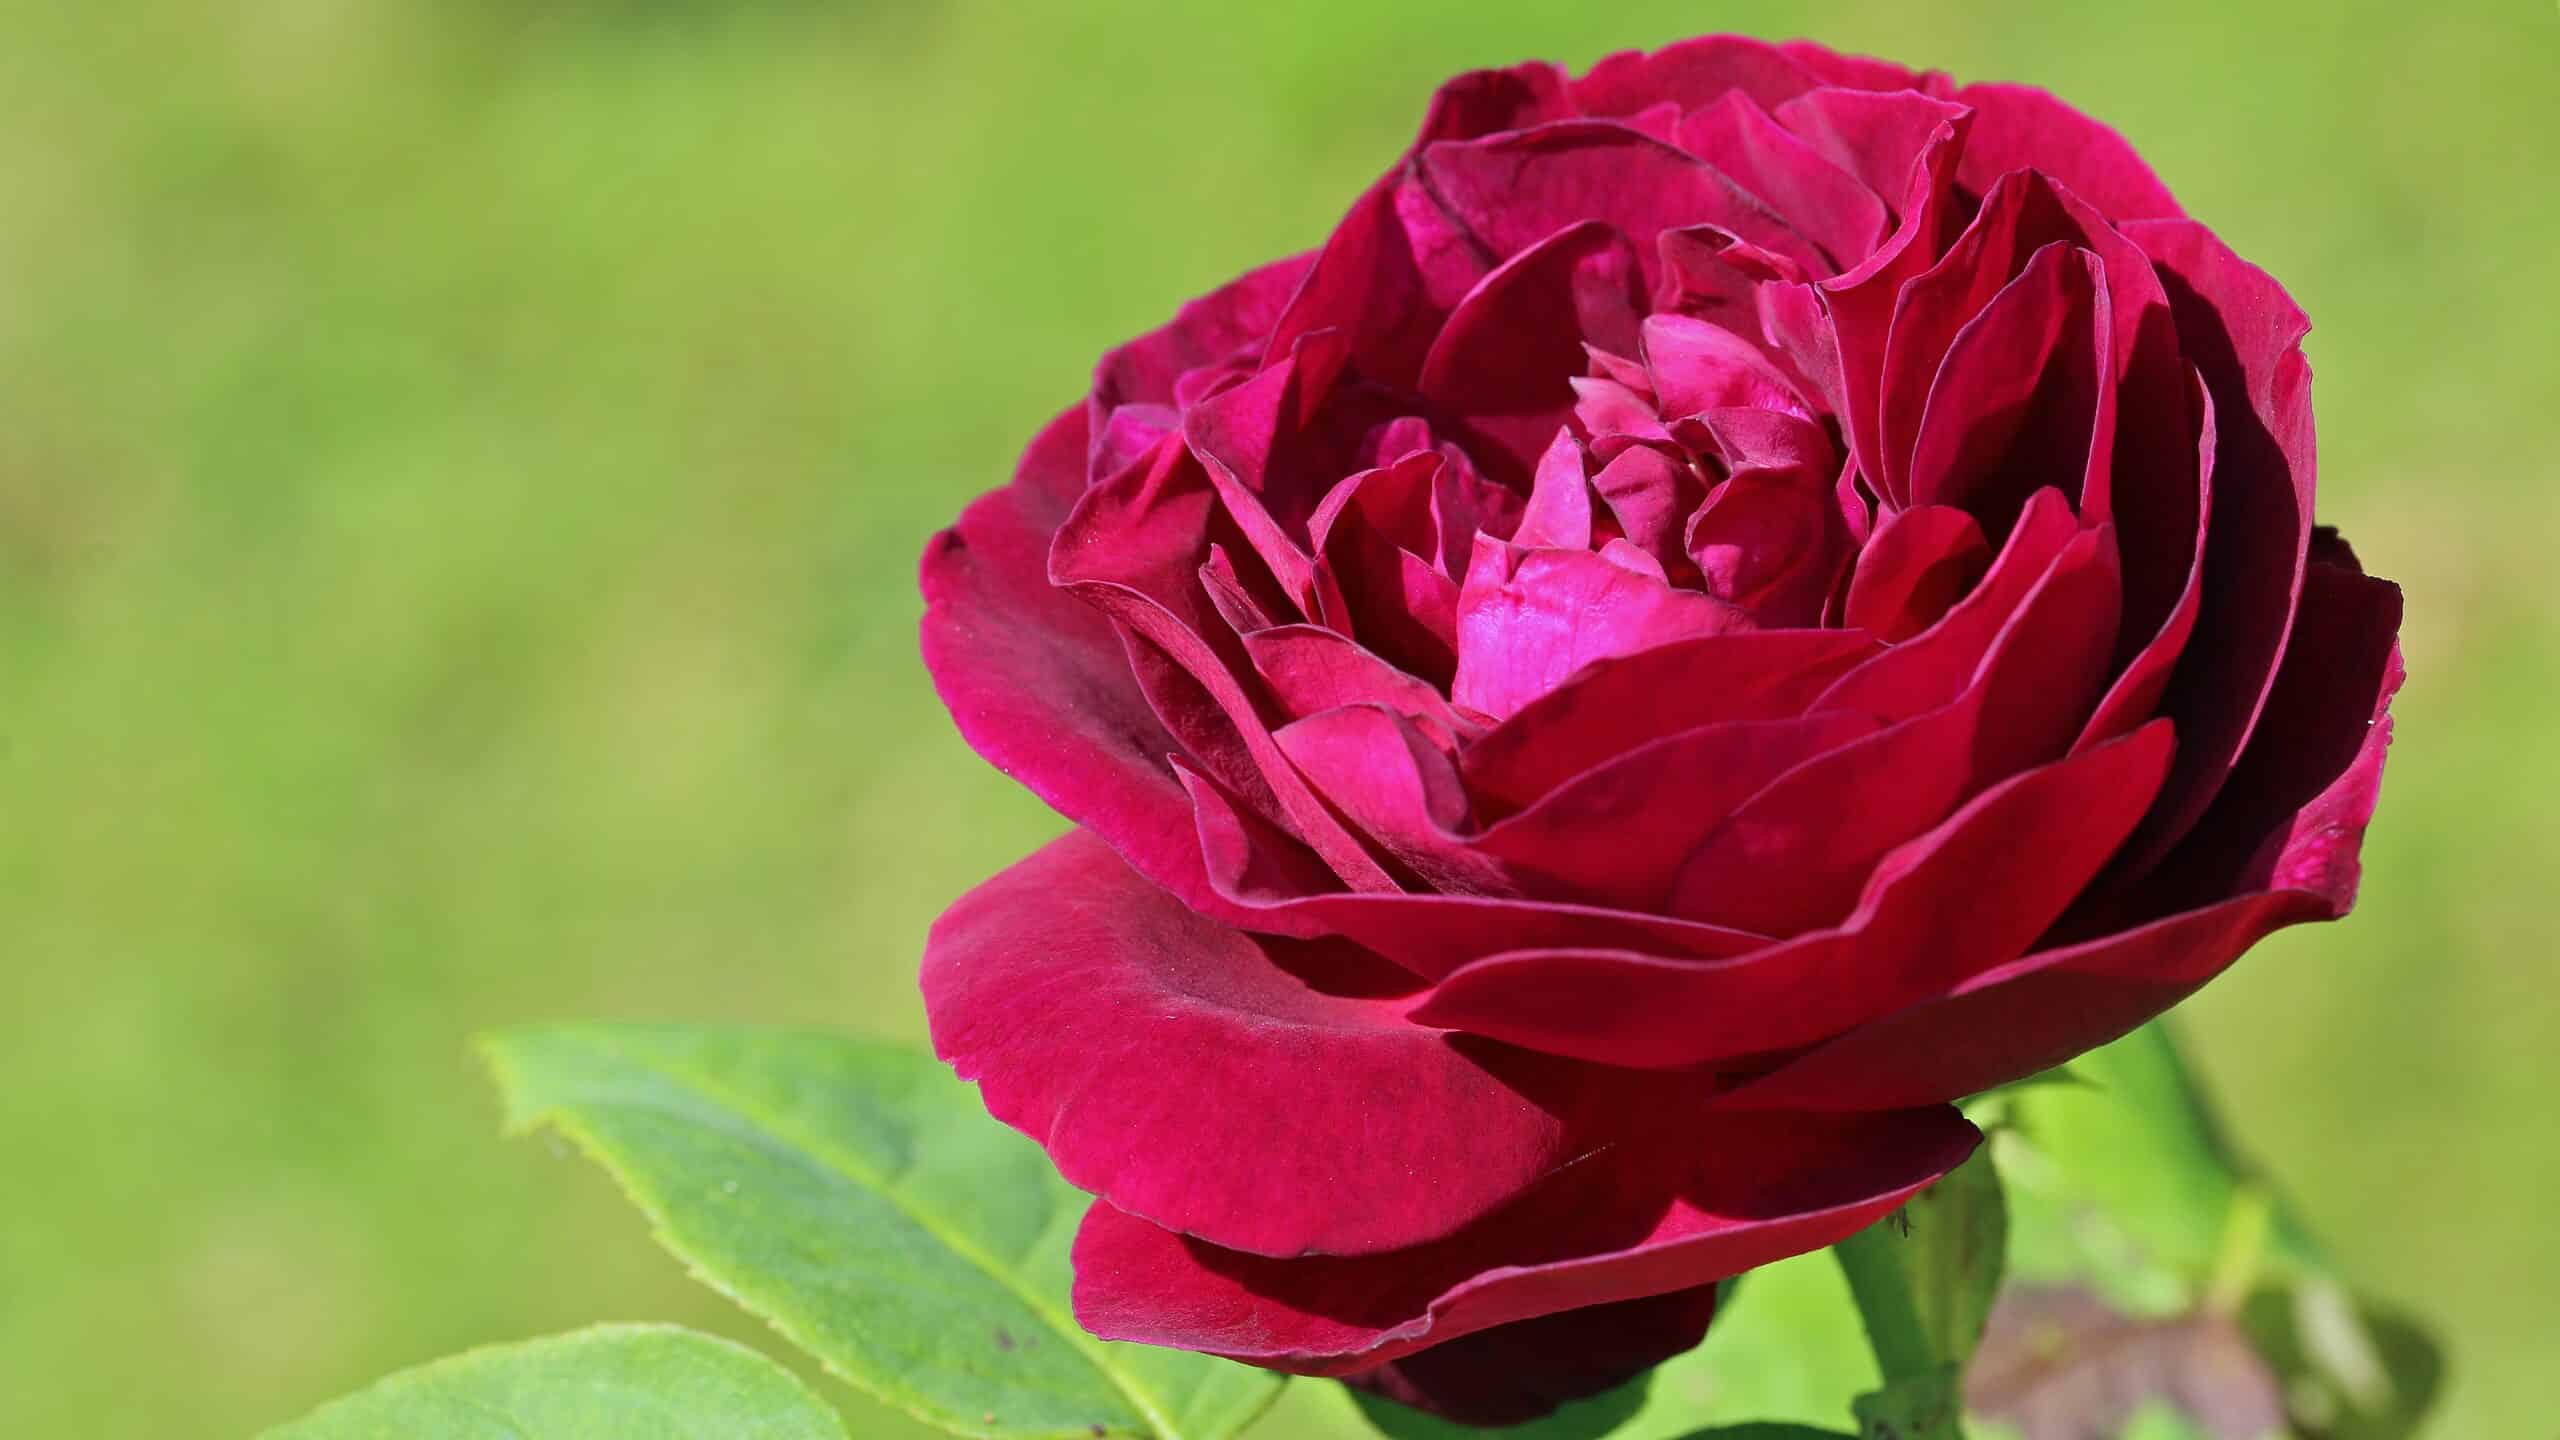 12 Types Of Old Fashioned Red Roses - AZ Animals